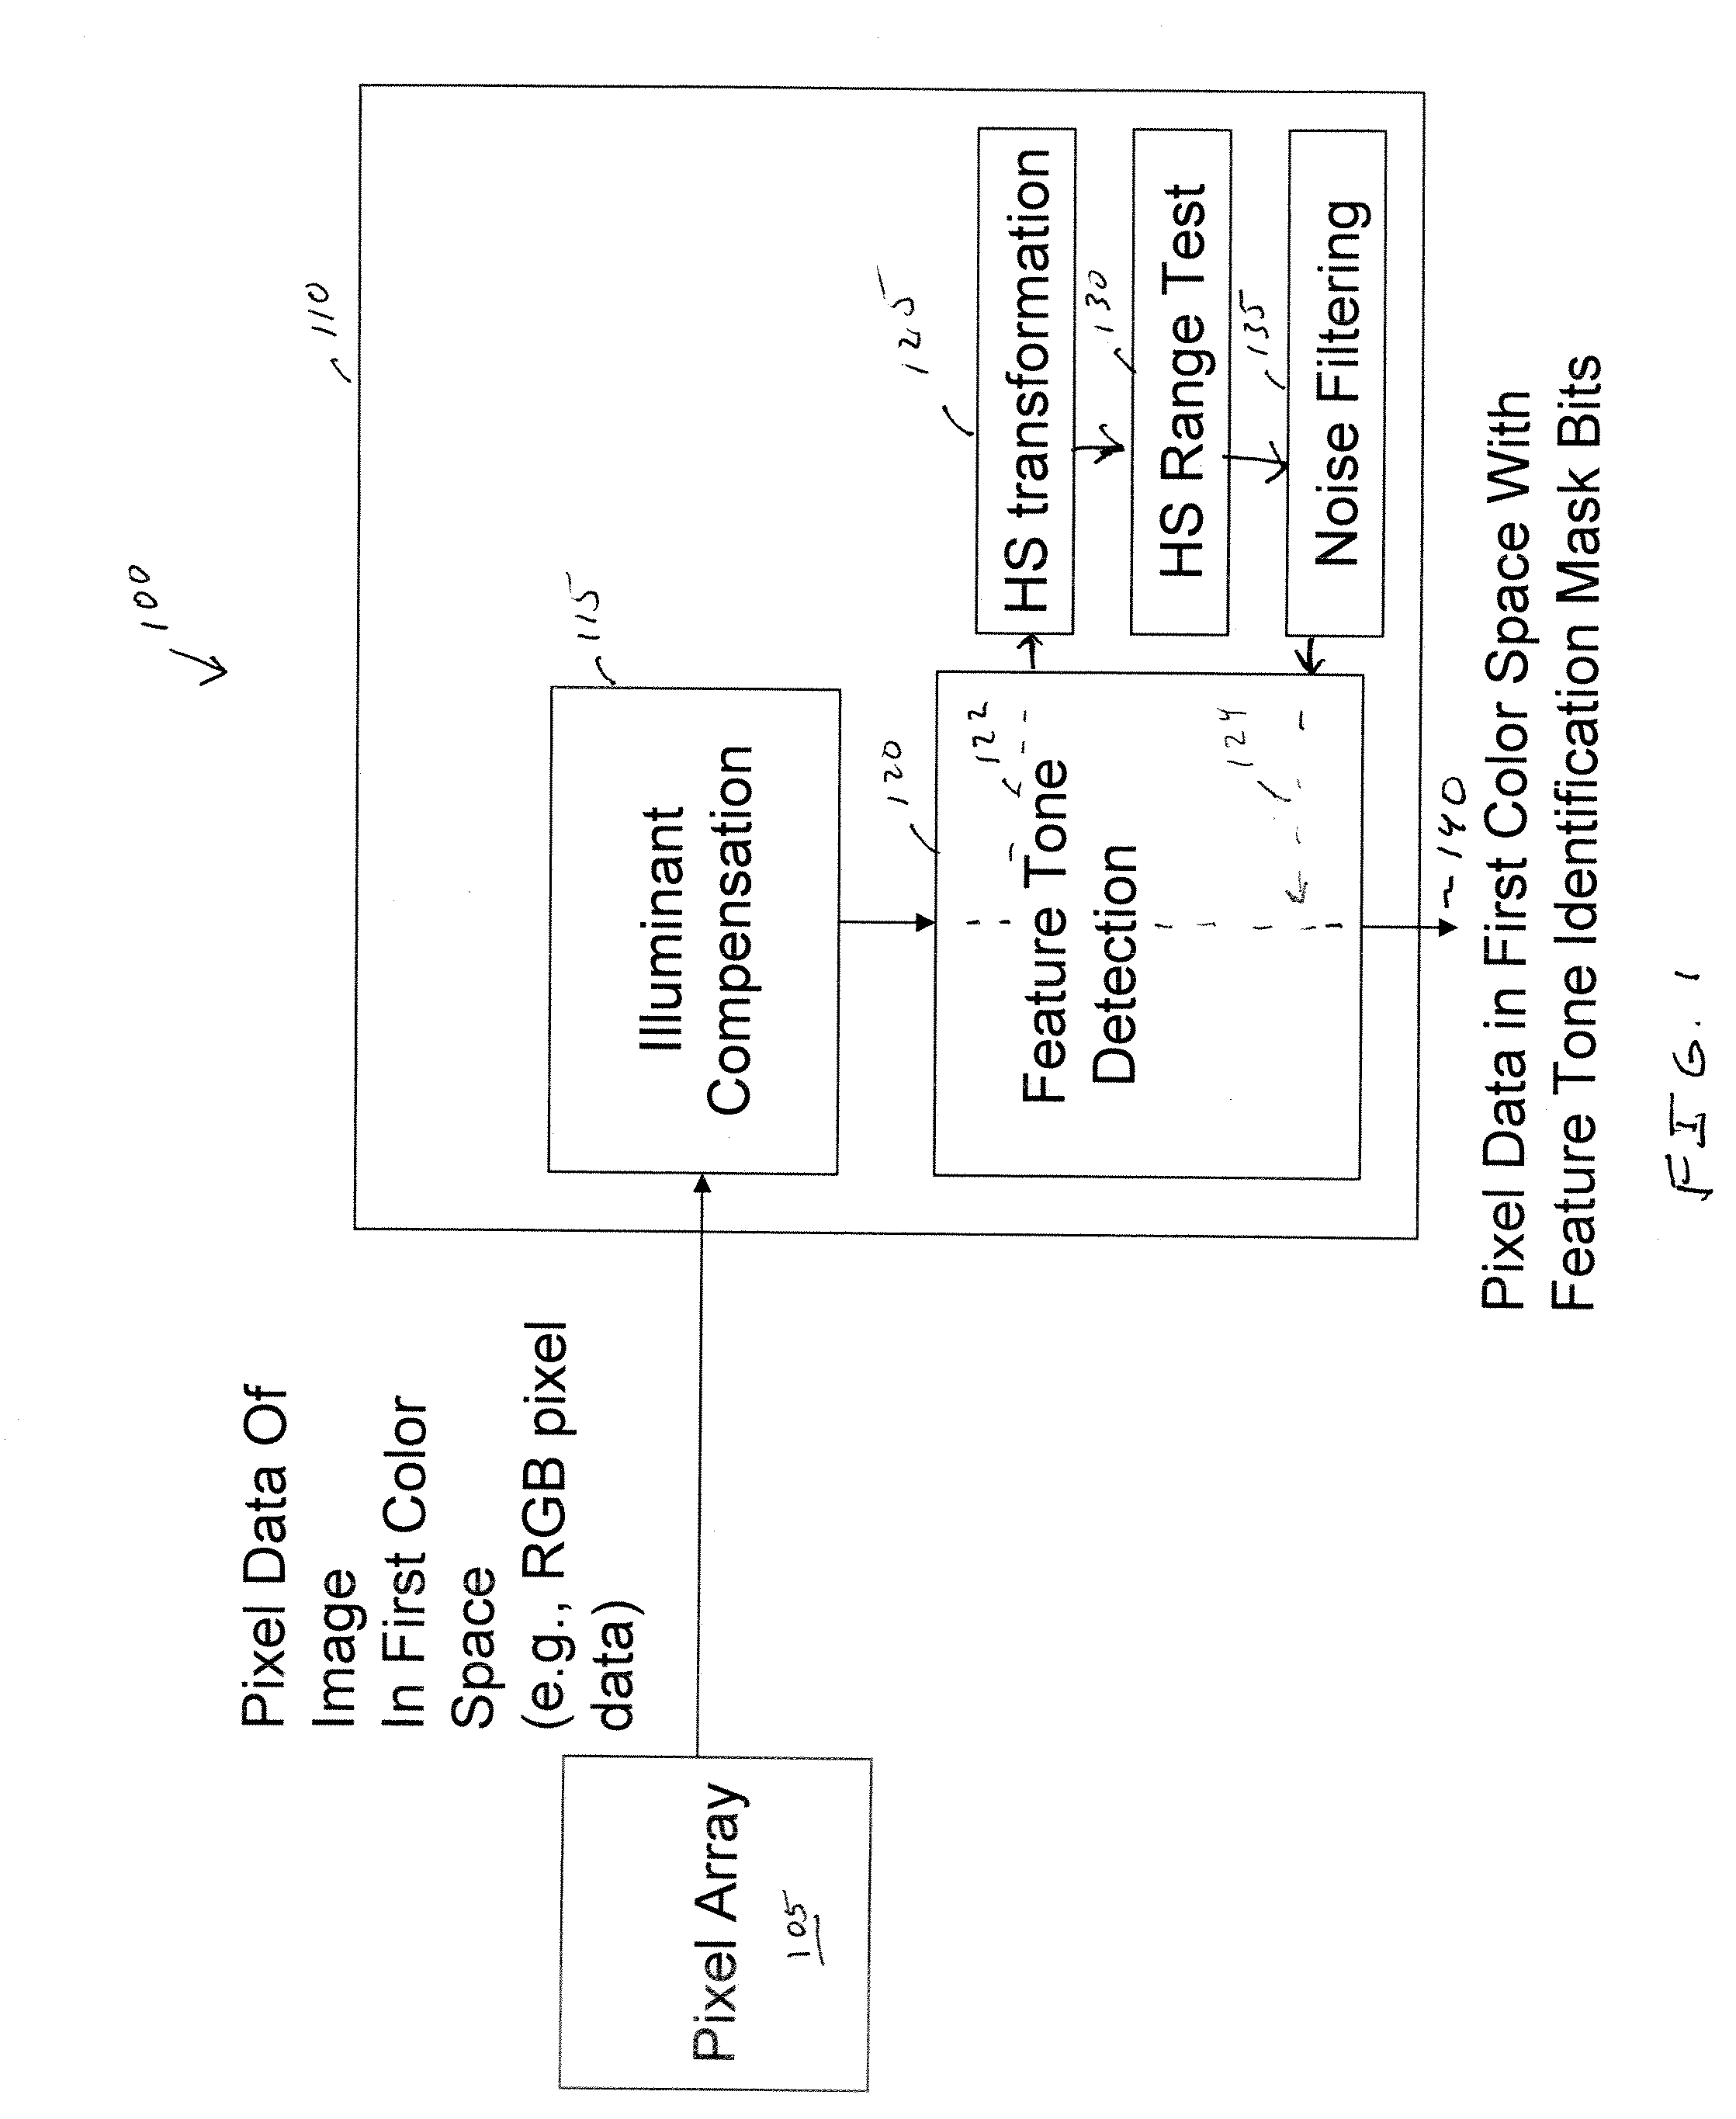 Apparatus, system, and method for skin tone detection in a CMOS image sensor